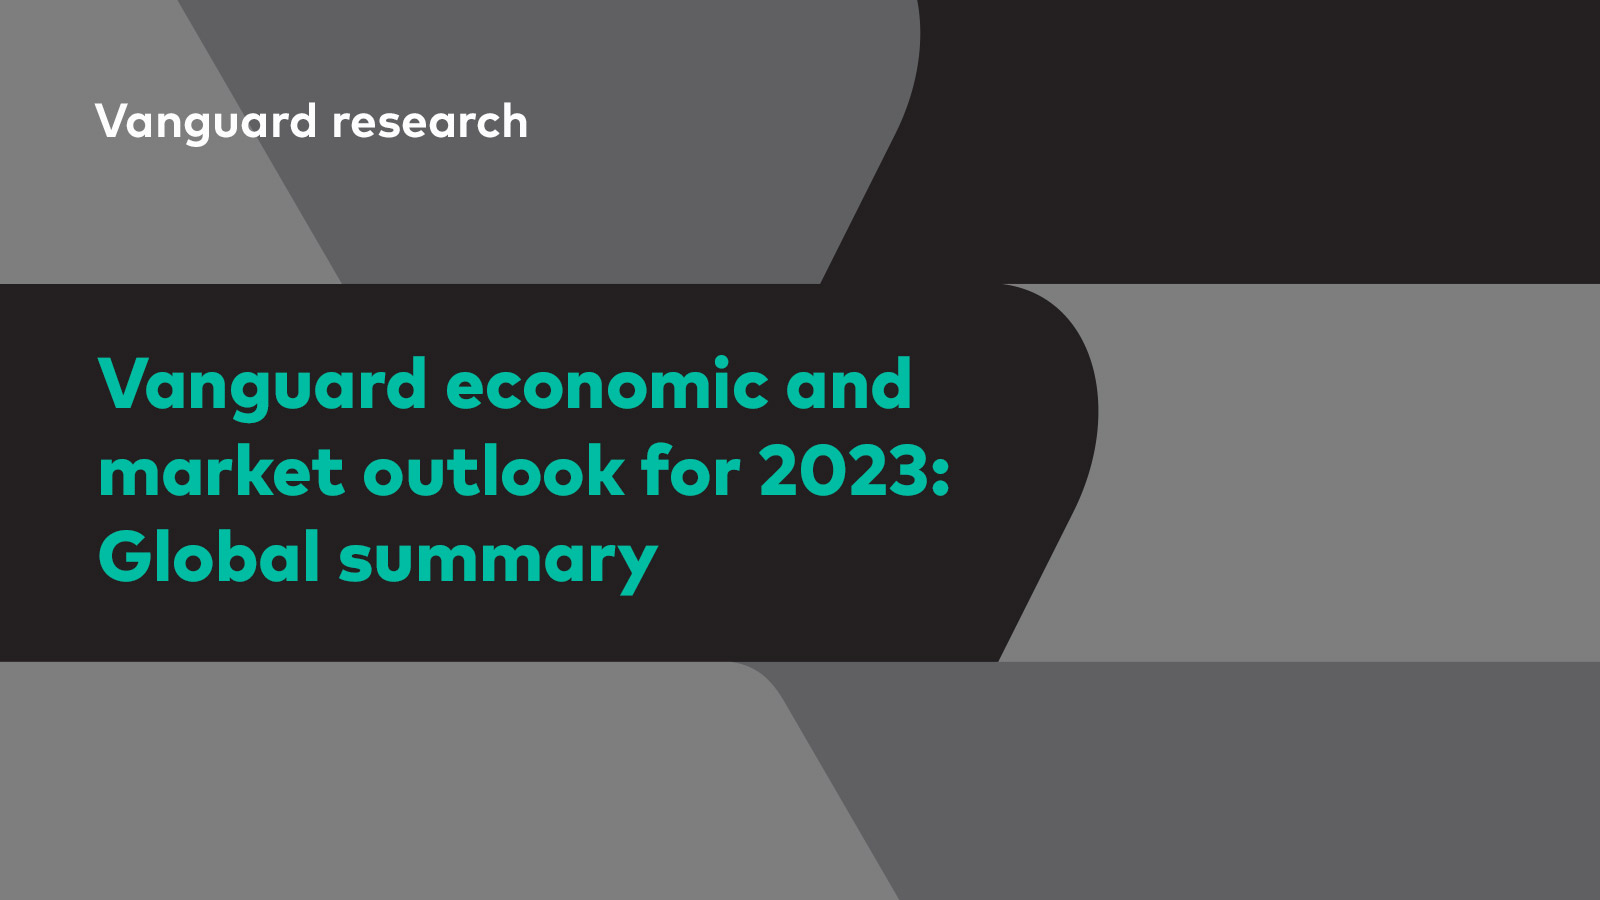 The global outlook summary highlights the toplevel findings of